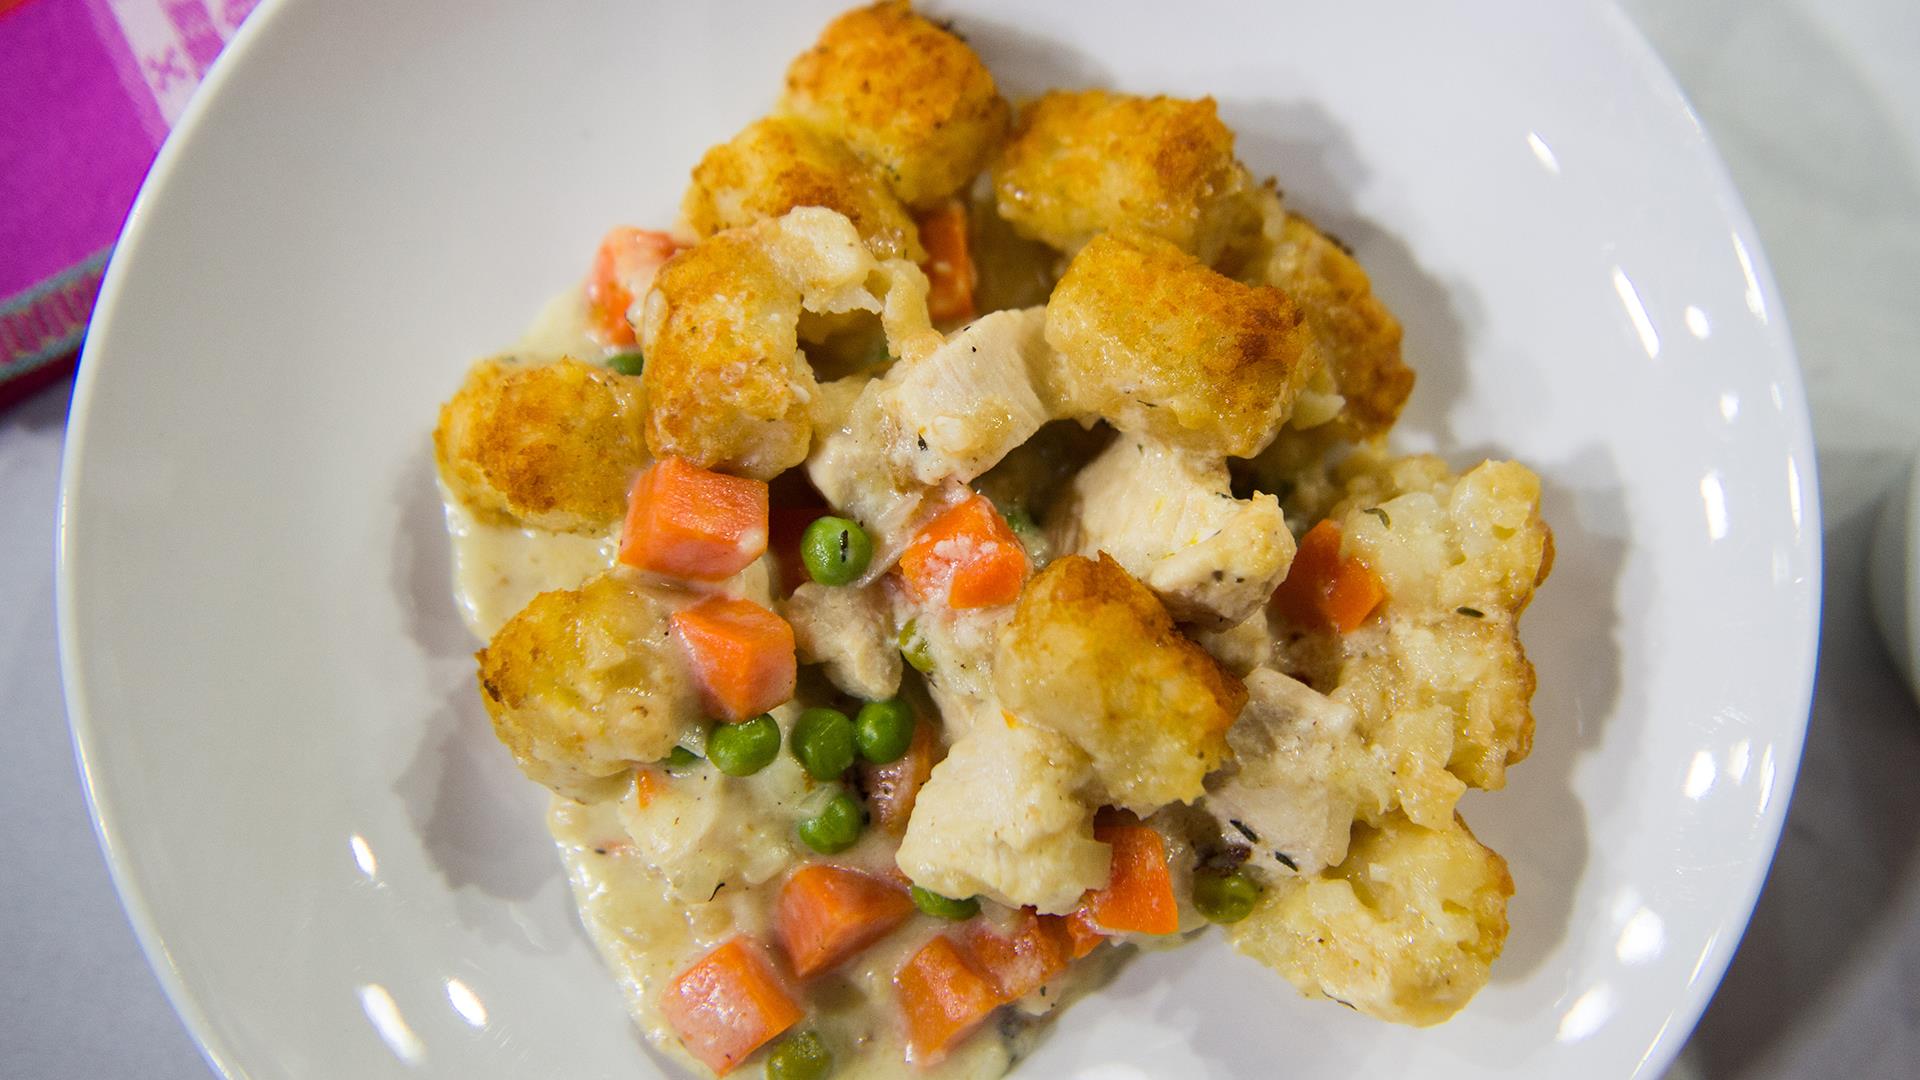 Tater Tot chicken pot pie: Try Molly Yeh's delicious recipe